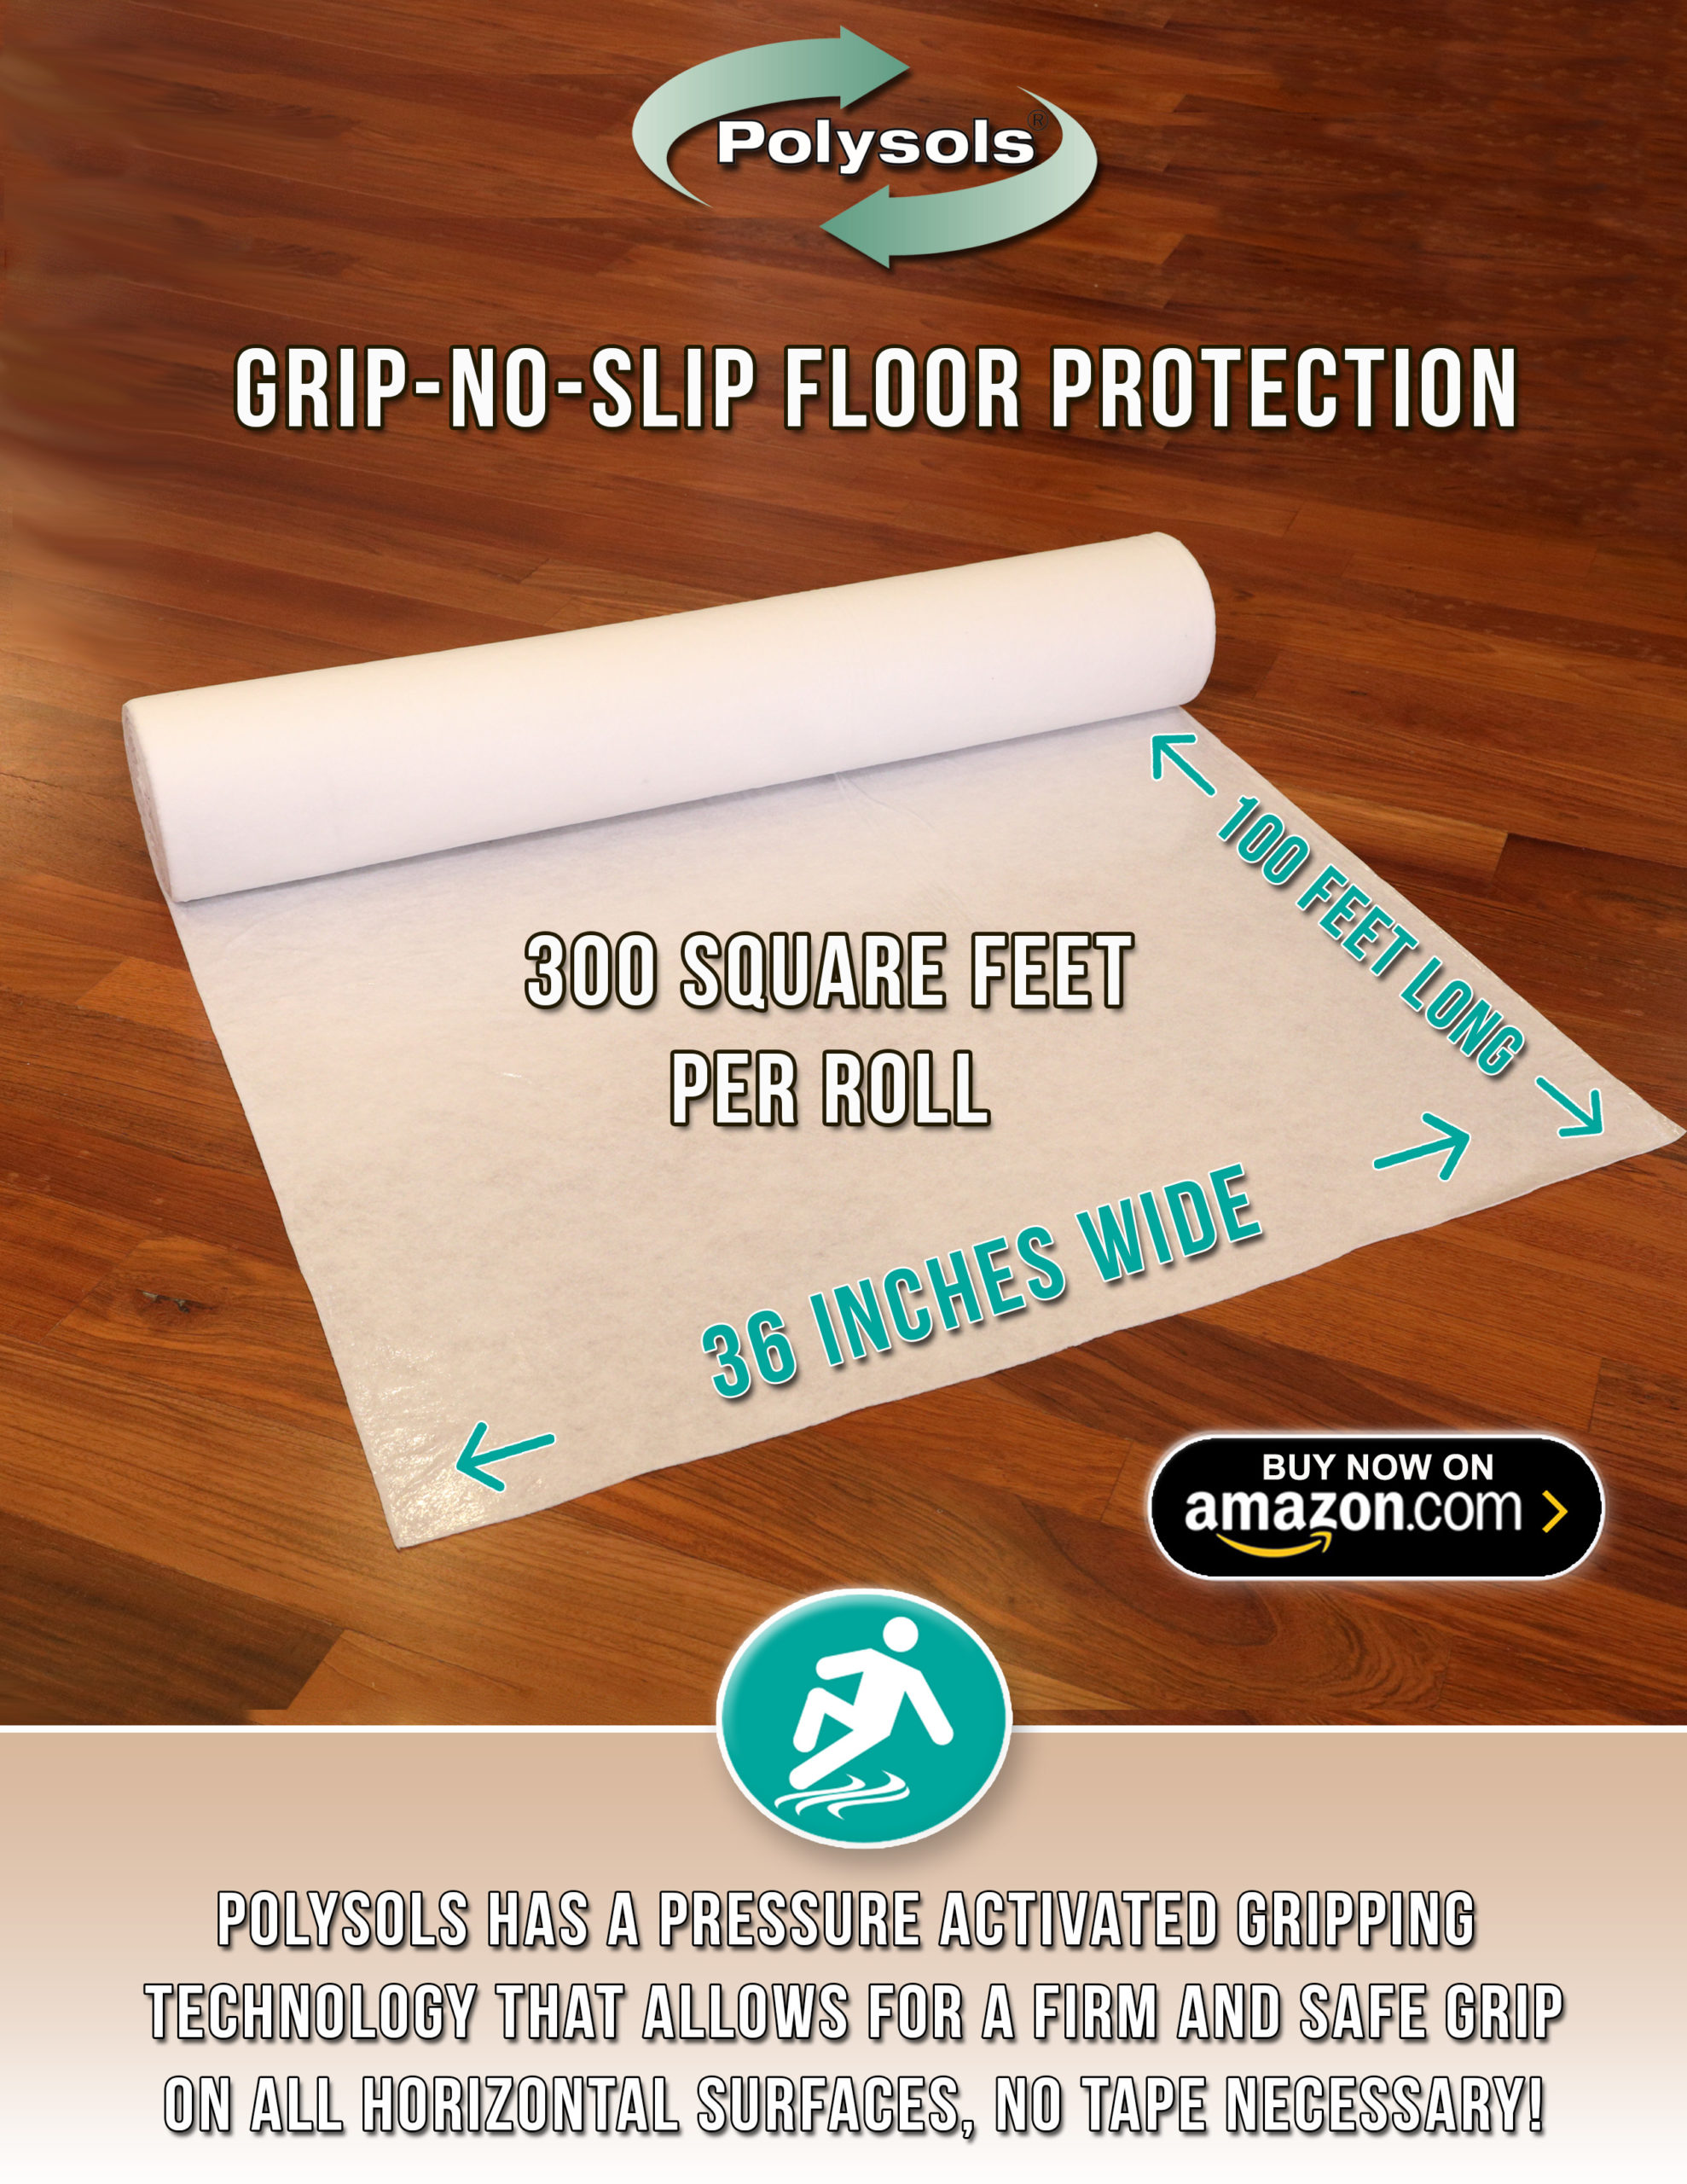 Polysols Heavy Duty Floor Film- Self Adhesive- Floor Protection for Hardwood Floors and Tile. Made in USA. Polysols Floor Film and plastic sheeting heavy duty for construction and DIY projects. Polysols 36 inch Floor Covering by 100 Feet Long.